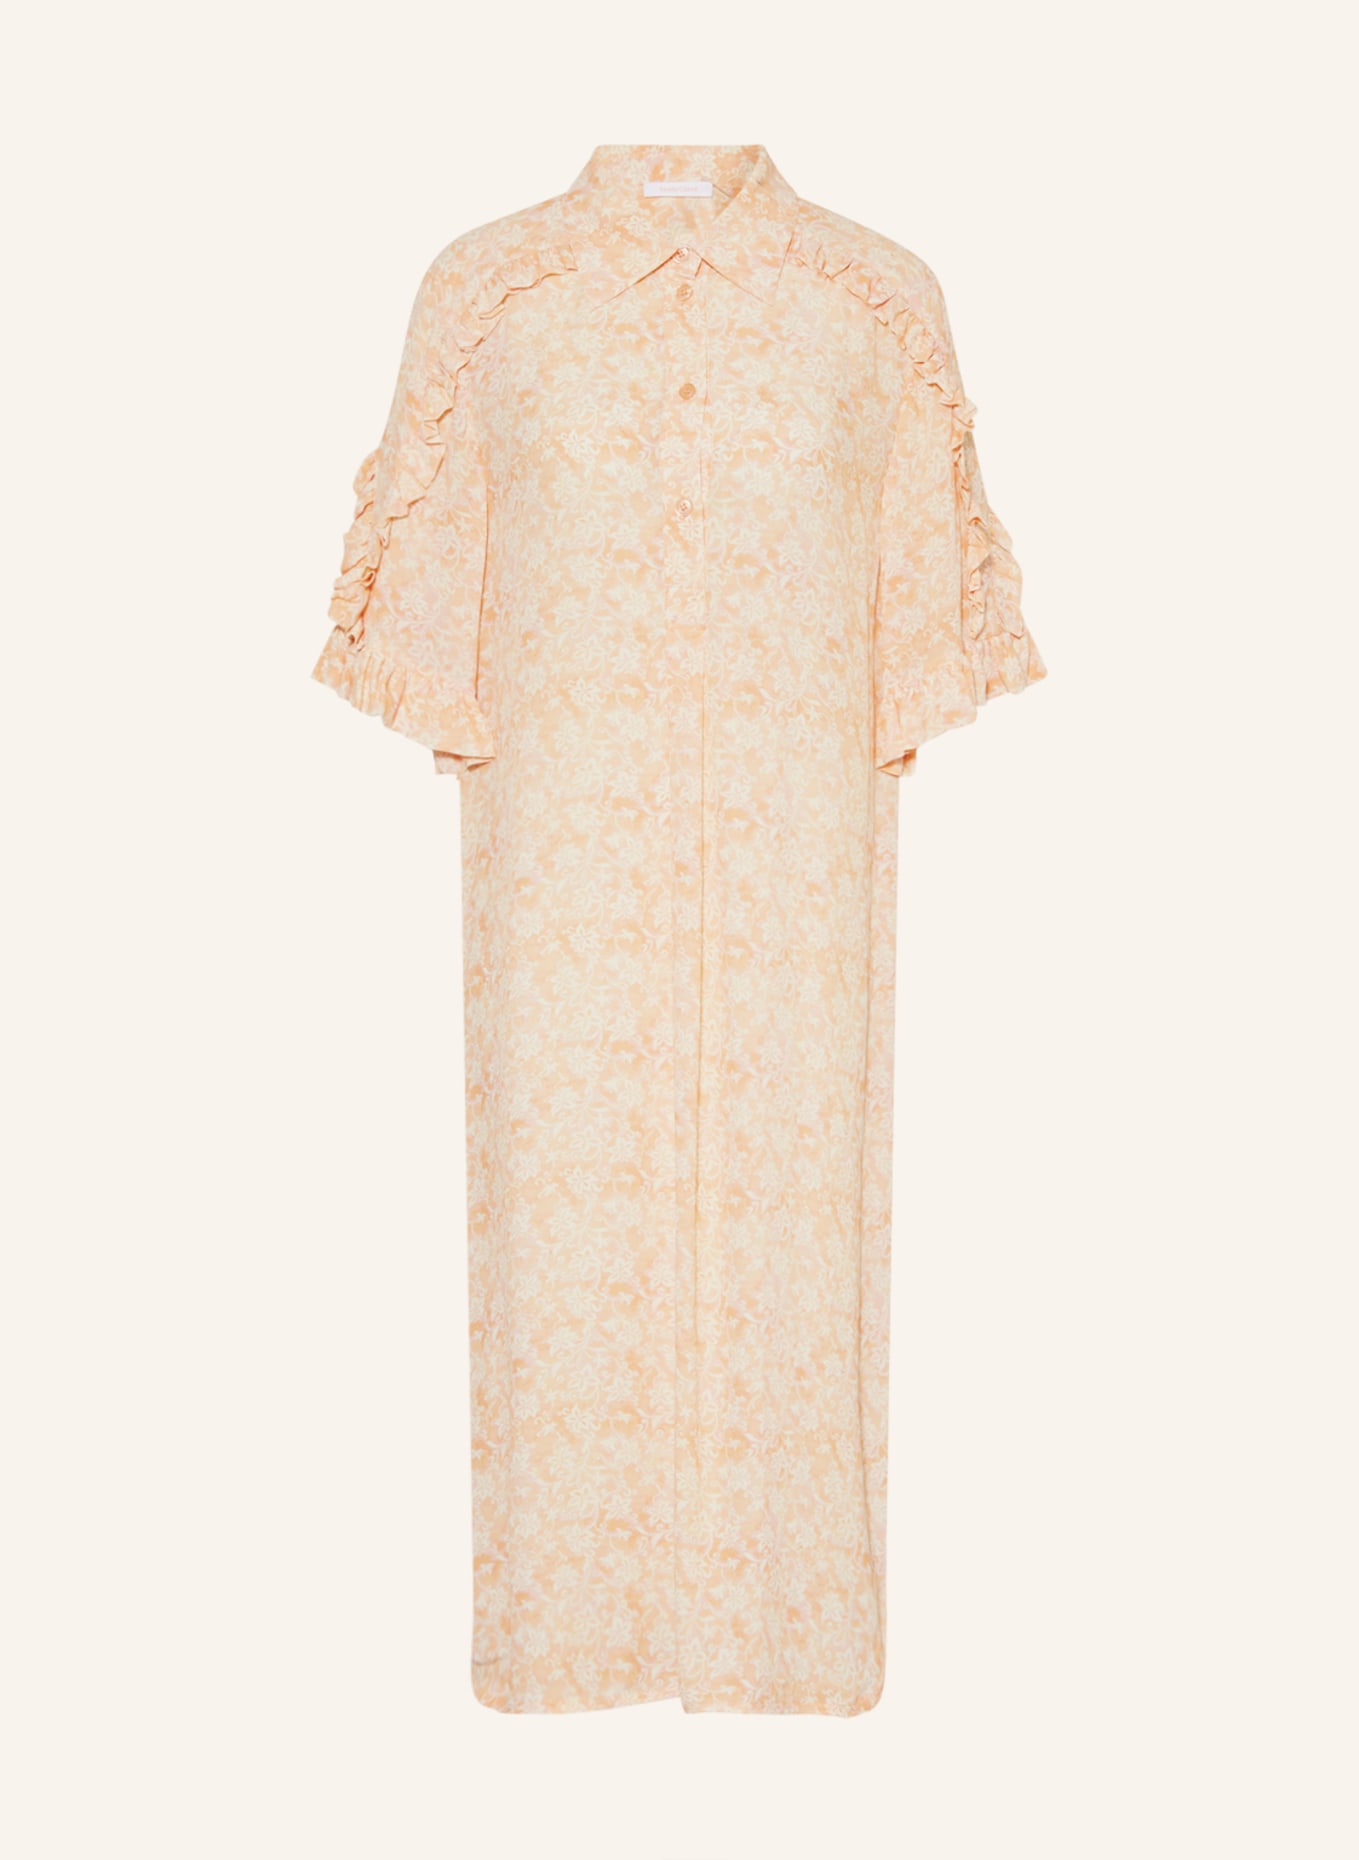 SEE BY CHLOÉ Dress with ruffles, Color: LIGHT ORANGE/ WHITE (Image 1)